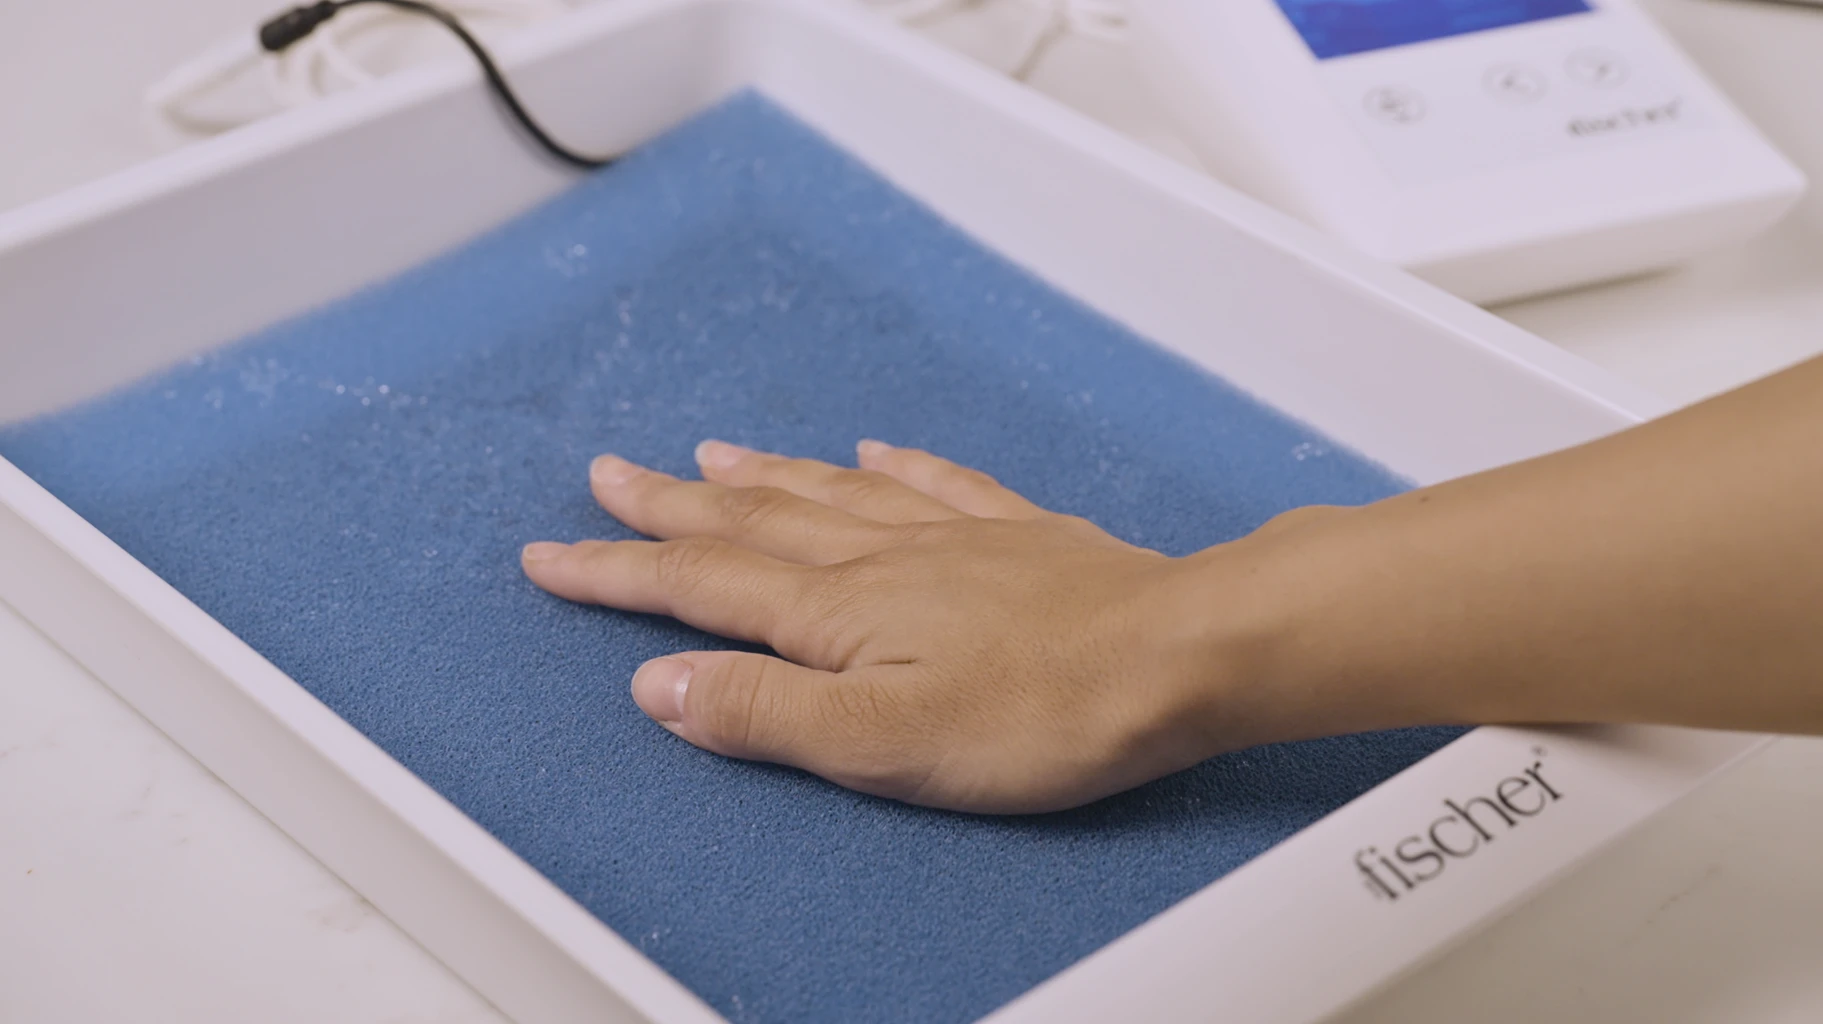 An individual effectively managing palmar (hands) hyperhidrosis utilizes RA Fischer Co.'s original metal-free iontophoresis device, "The Fischer." Their hand is comfortably placed within one of the white water bath trays containing blue pH-balancing foam and equipped with silicone-graphite electrodes, demonstrating a comprehensive solution for treating their condition.